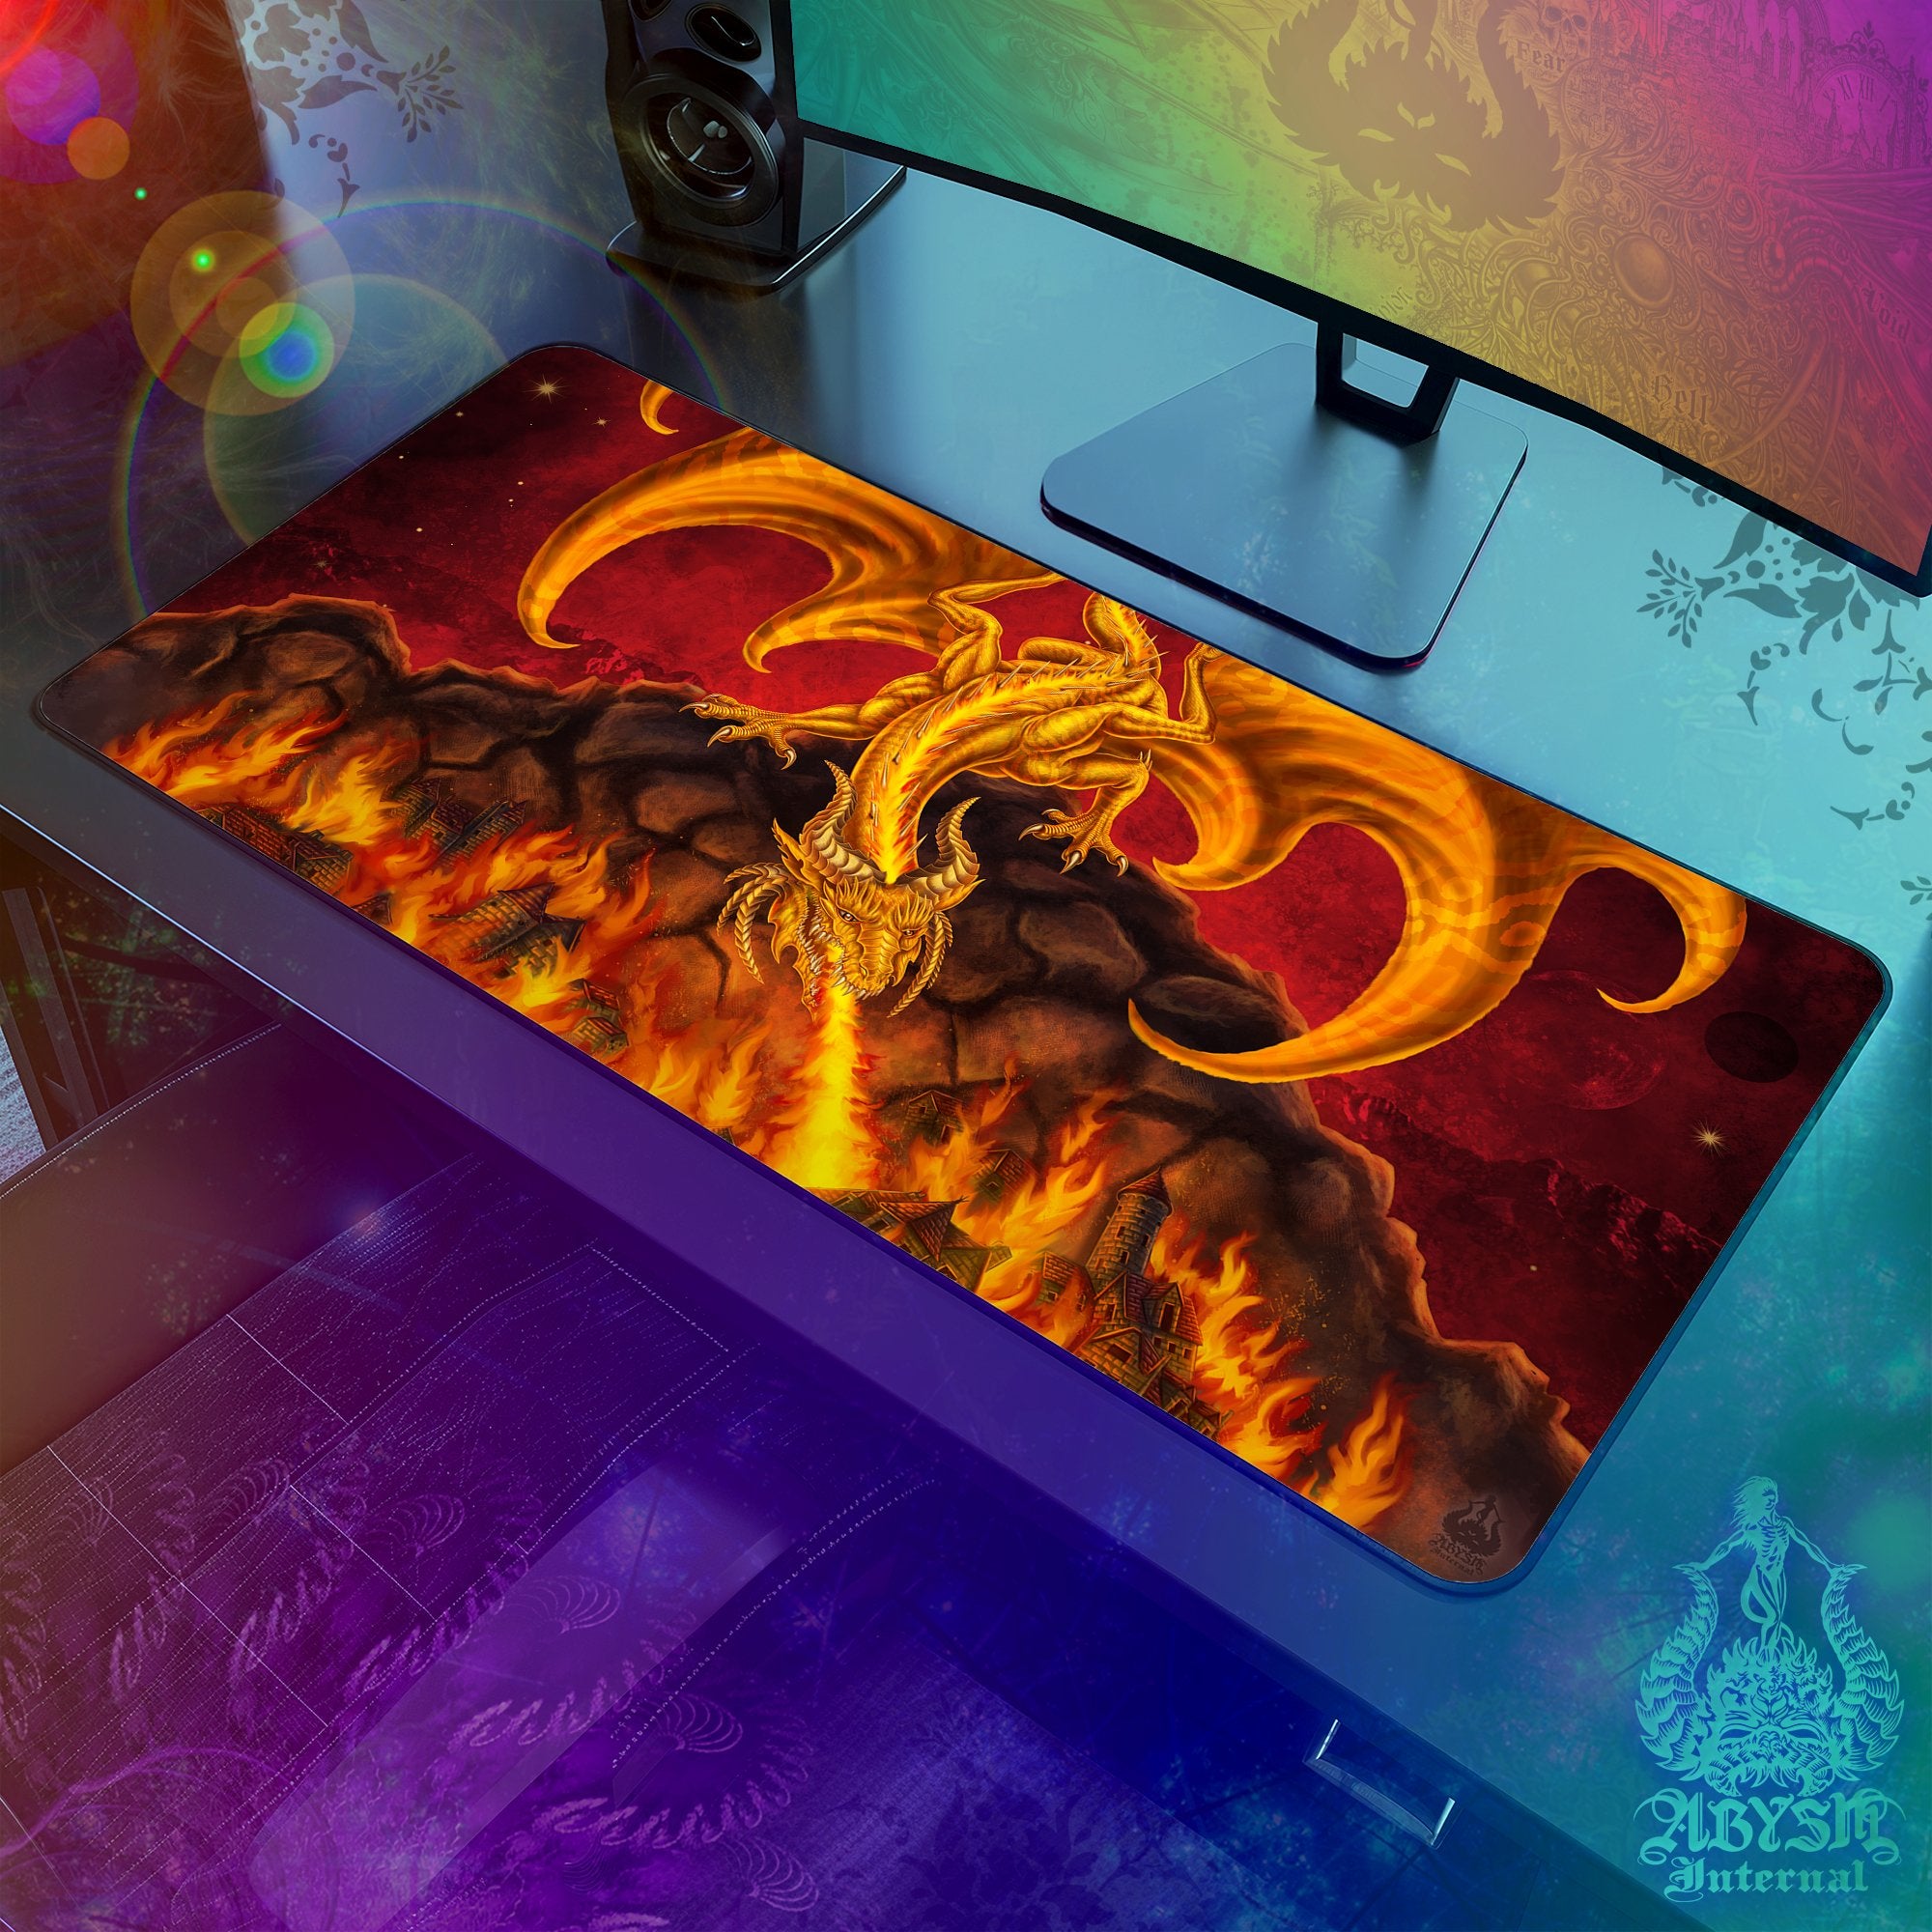 Gold Dragon Workpad, Fantasy Art Gaming Mouse Pad, Game Desk Mat, Table Protector Cover, RPG, DM Gift Print - Fire - Abysm Internal